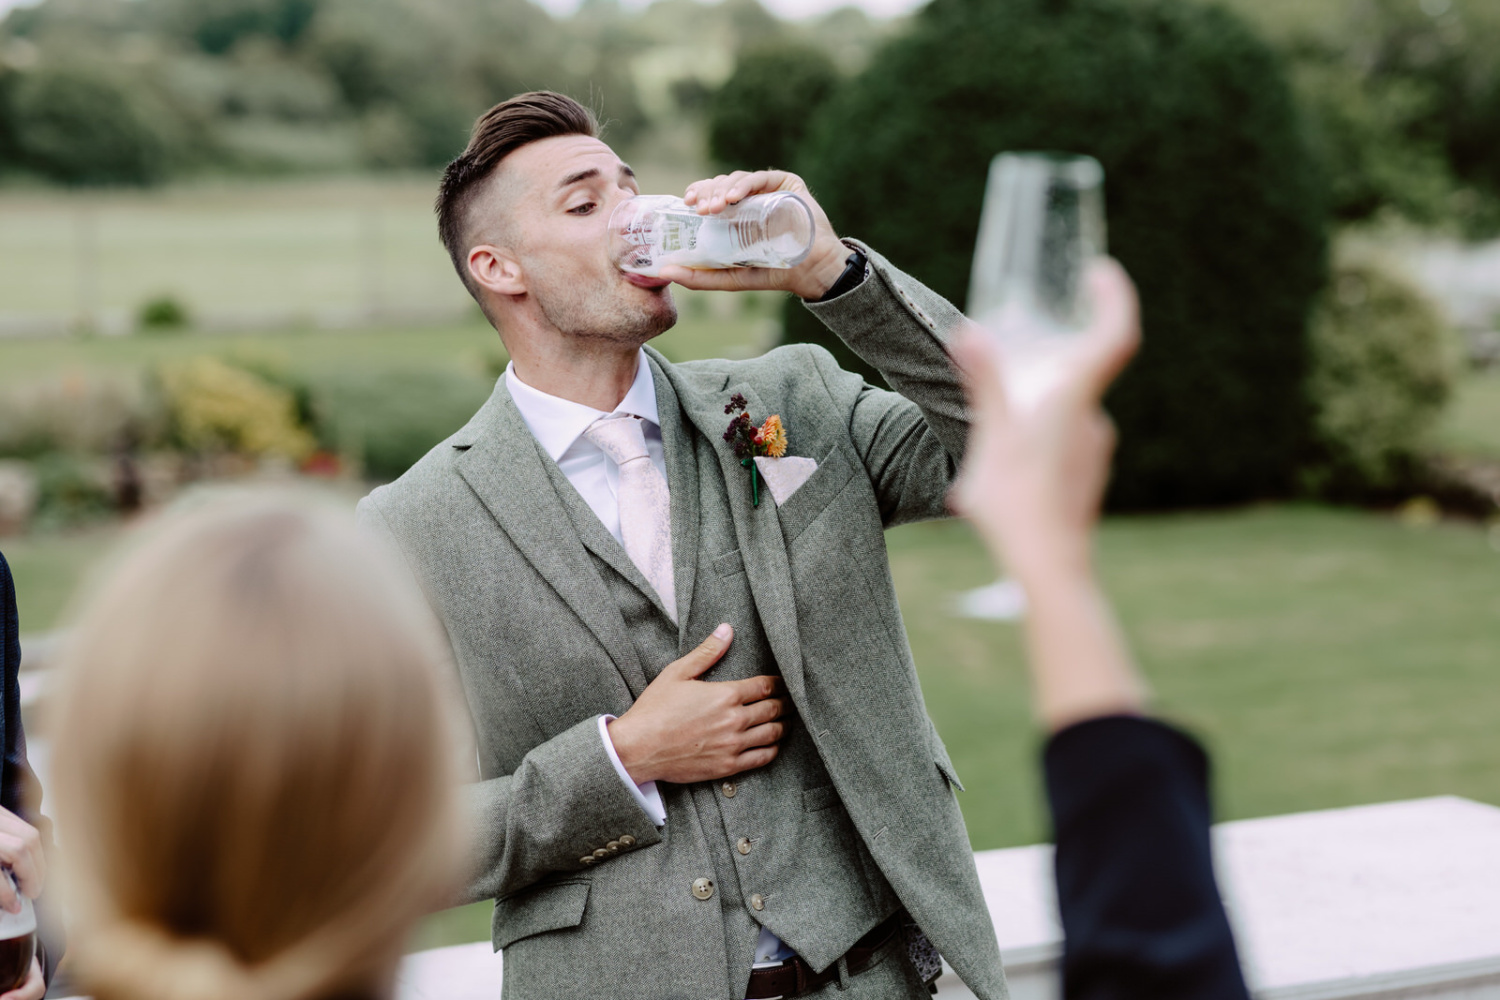 A man in a suit drinking beer from a glass.